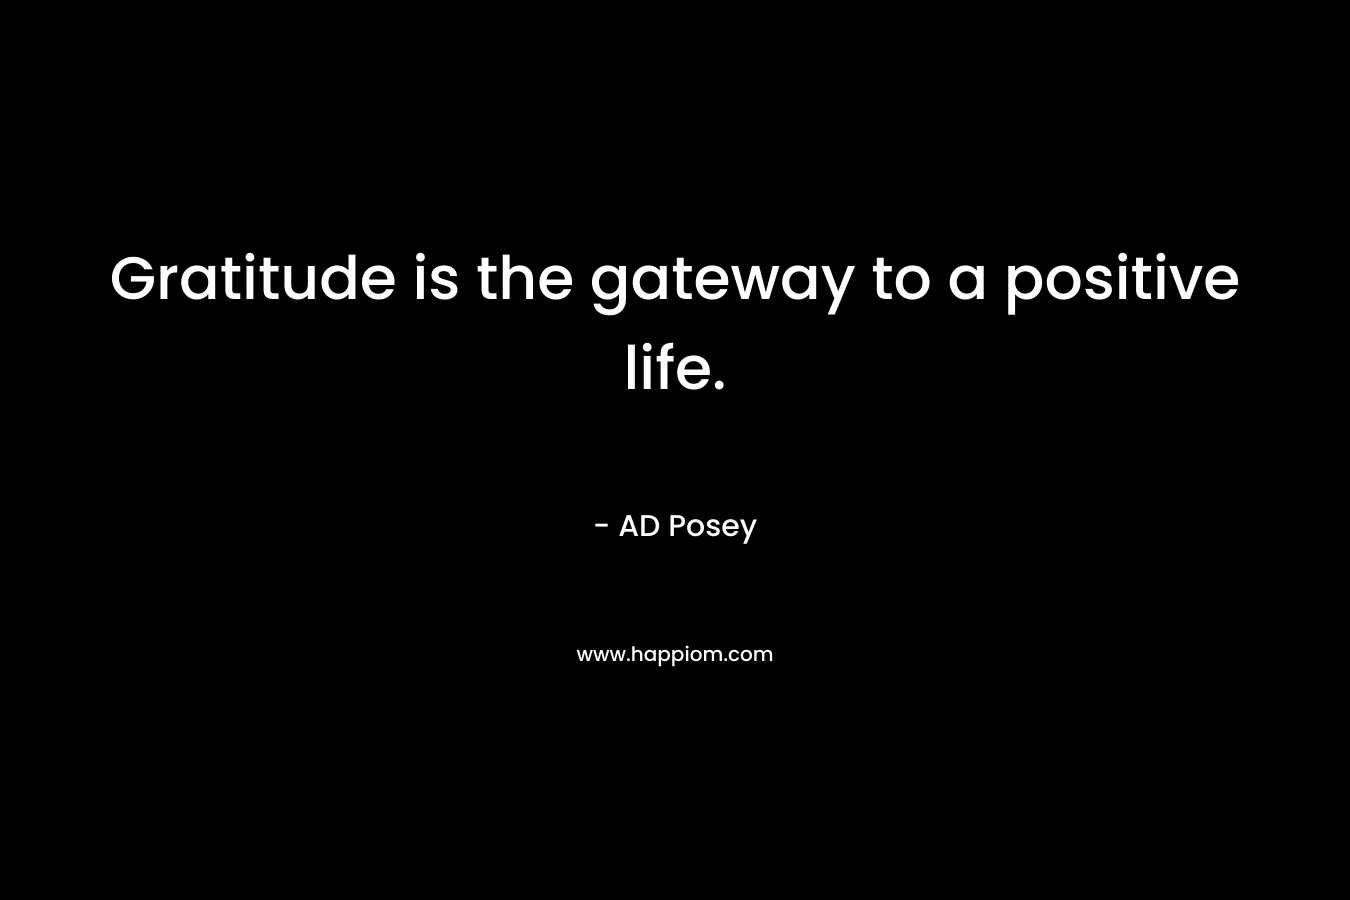 Gratitude is the gateway to a positive life.